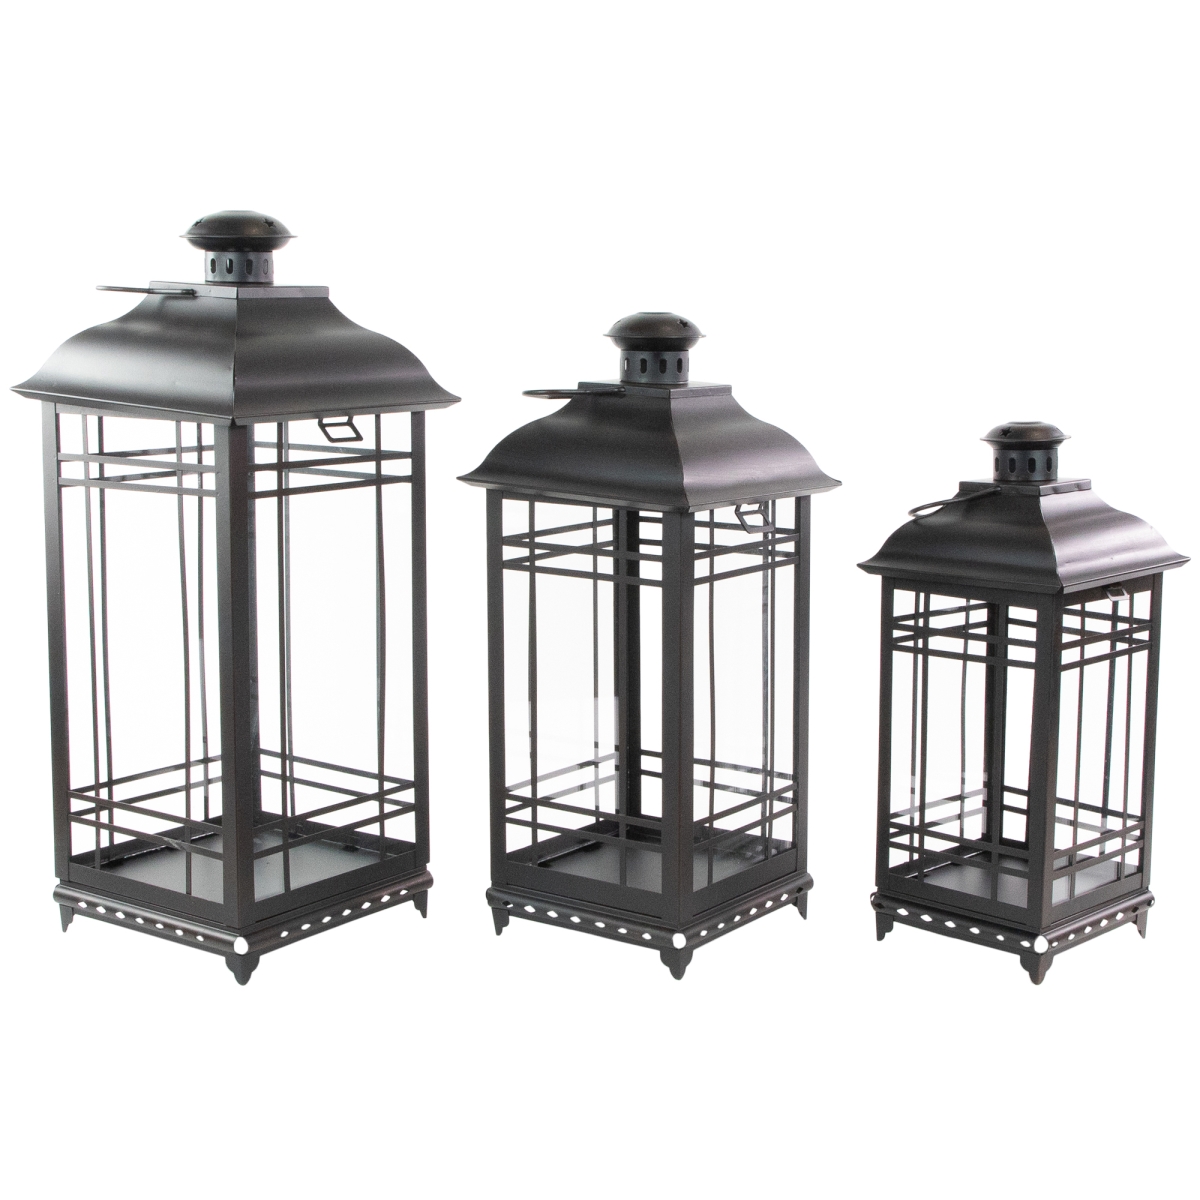 Picture of Northlight 35132871 19.5 in. Mission Style Candle Lanterns, Distressed Black - Set of 3